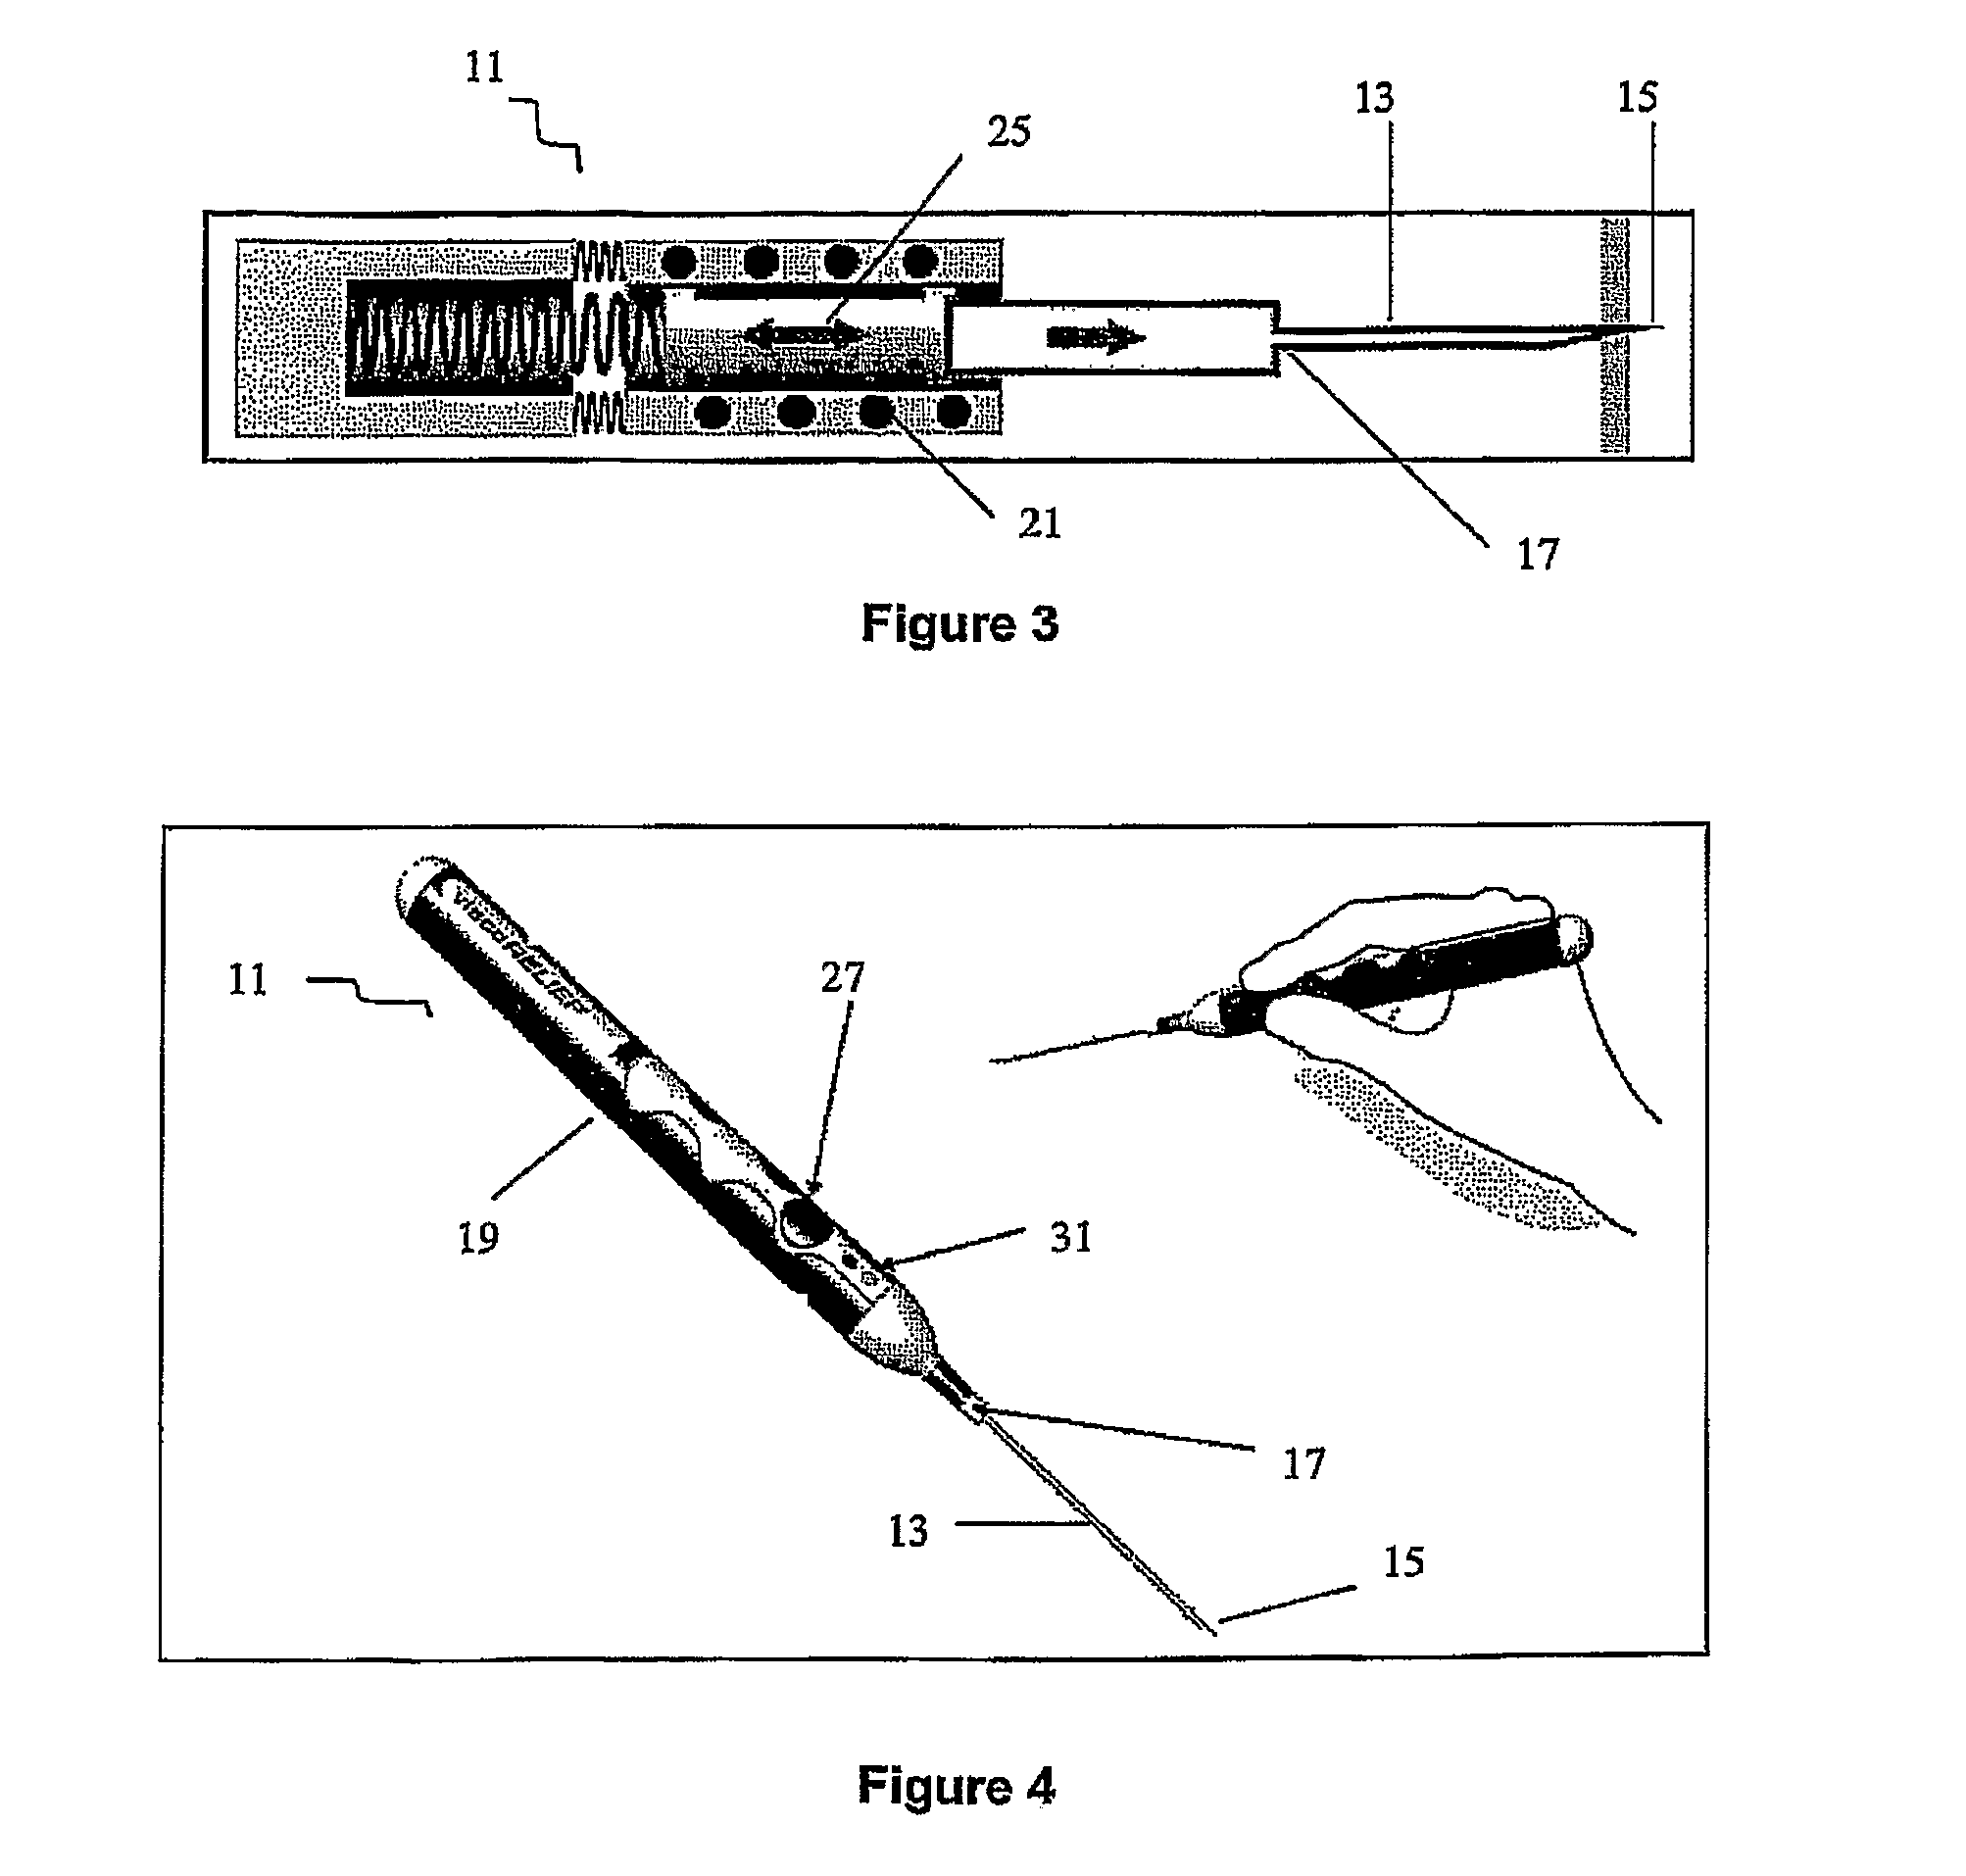 Method and apparatus for intra-articular injection or aspiration